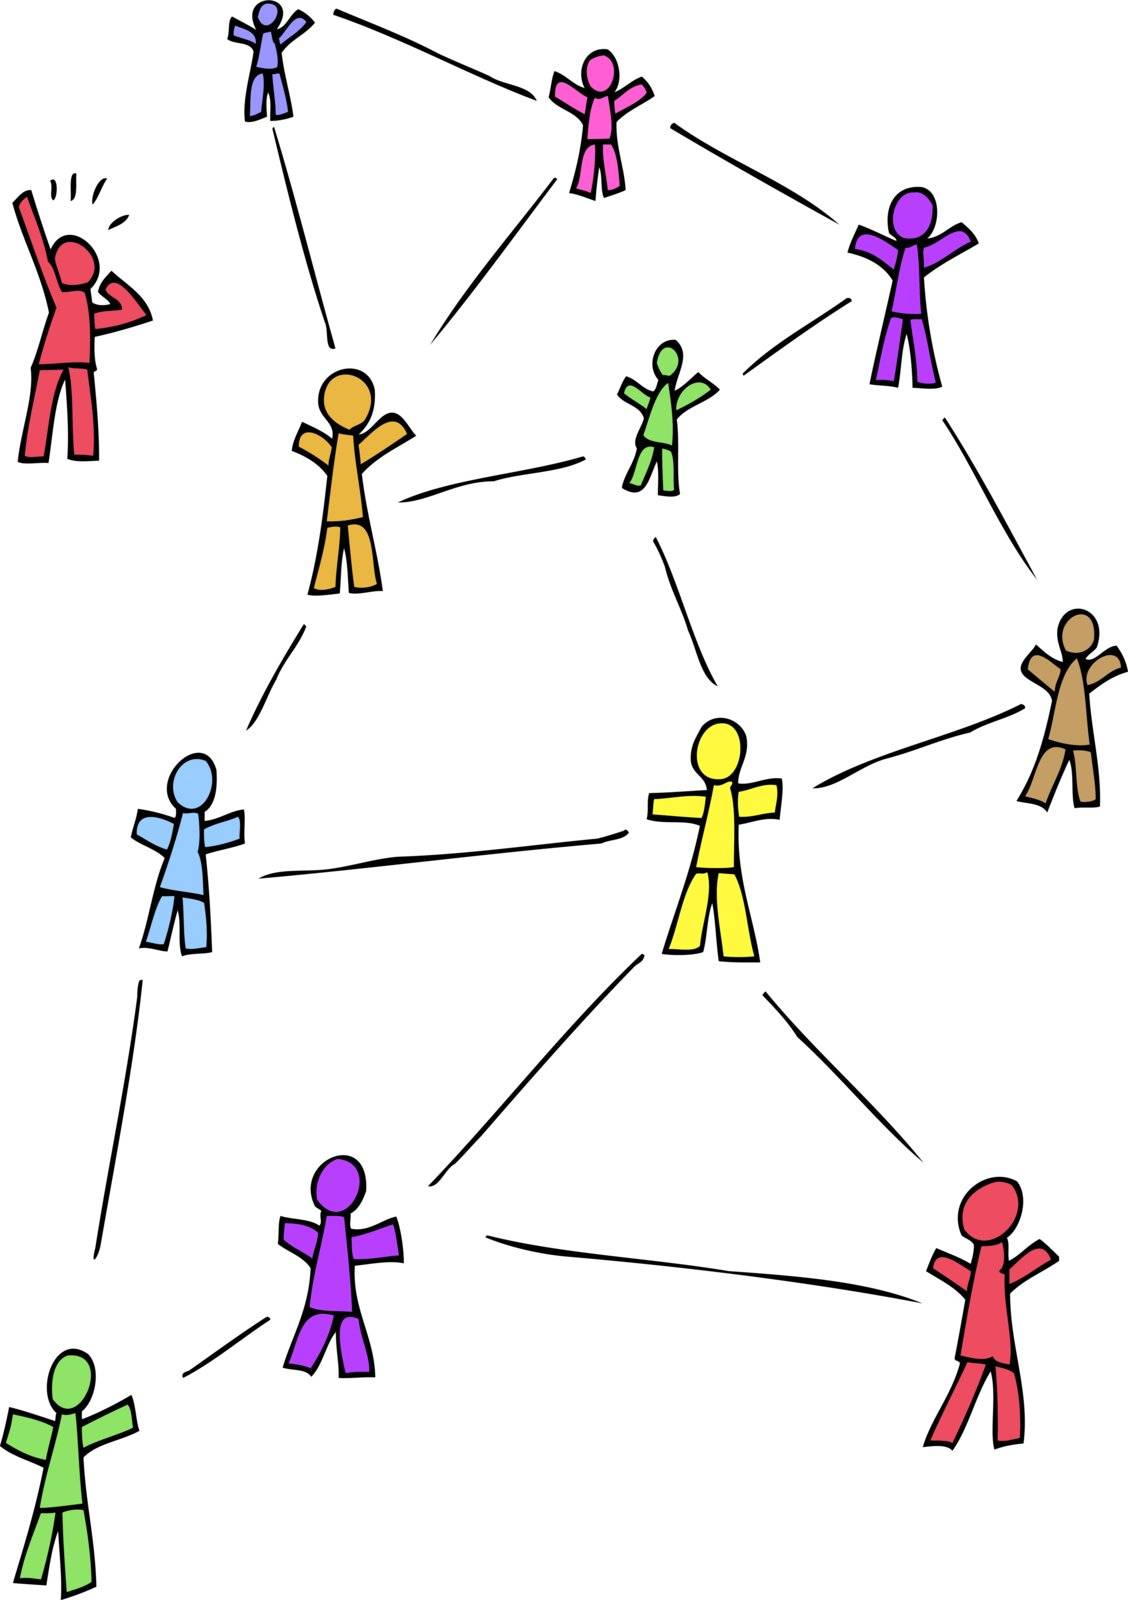 Cartoon stick figures representing someone being left out of the social network.